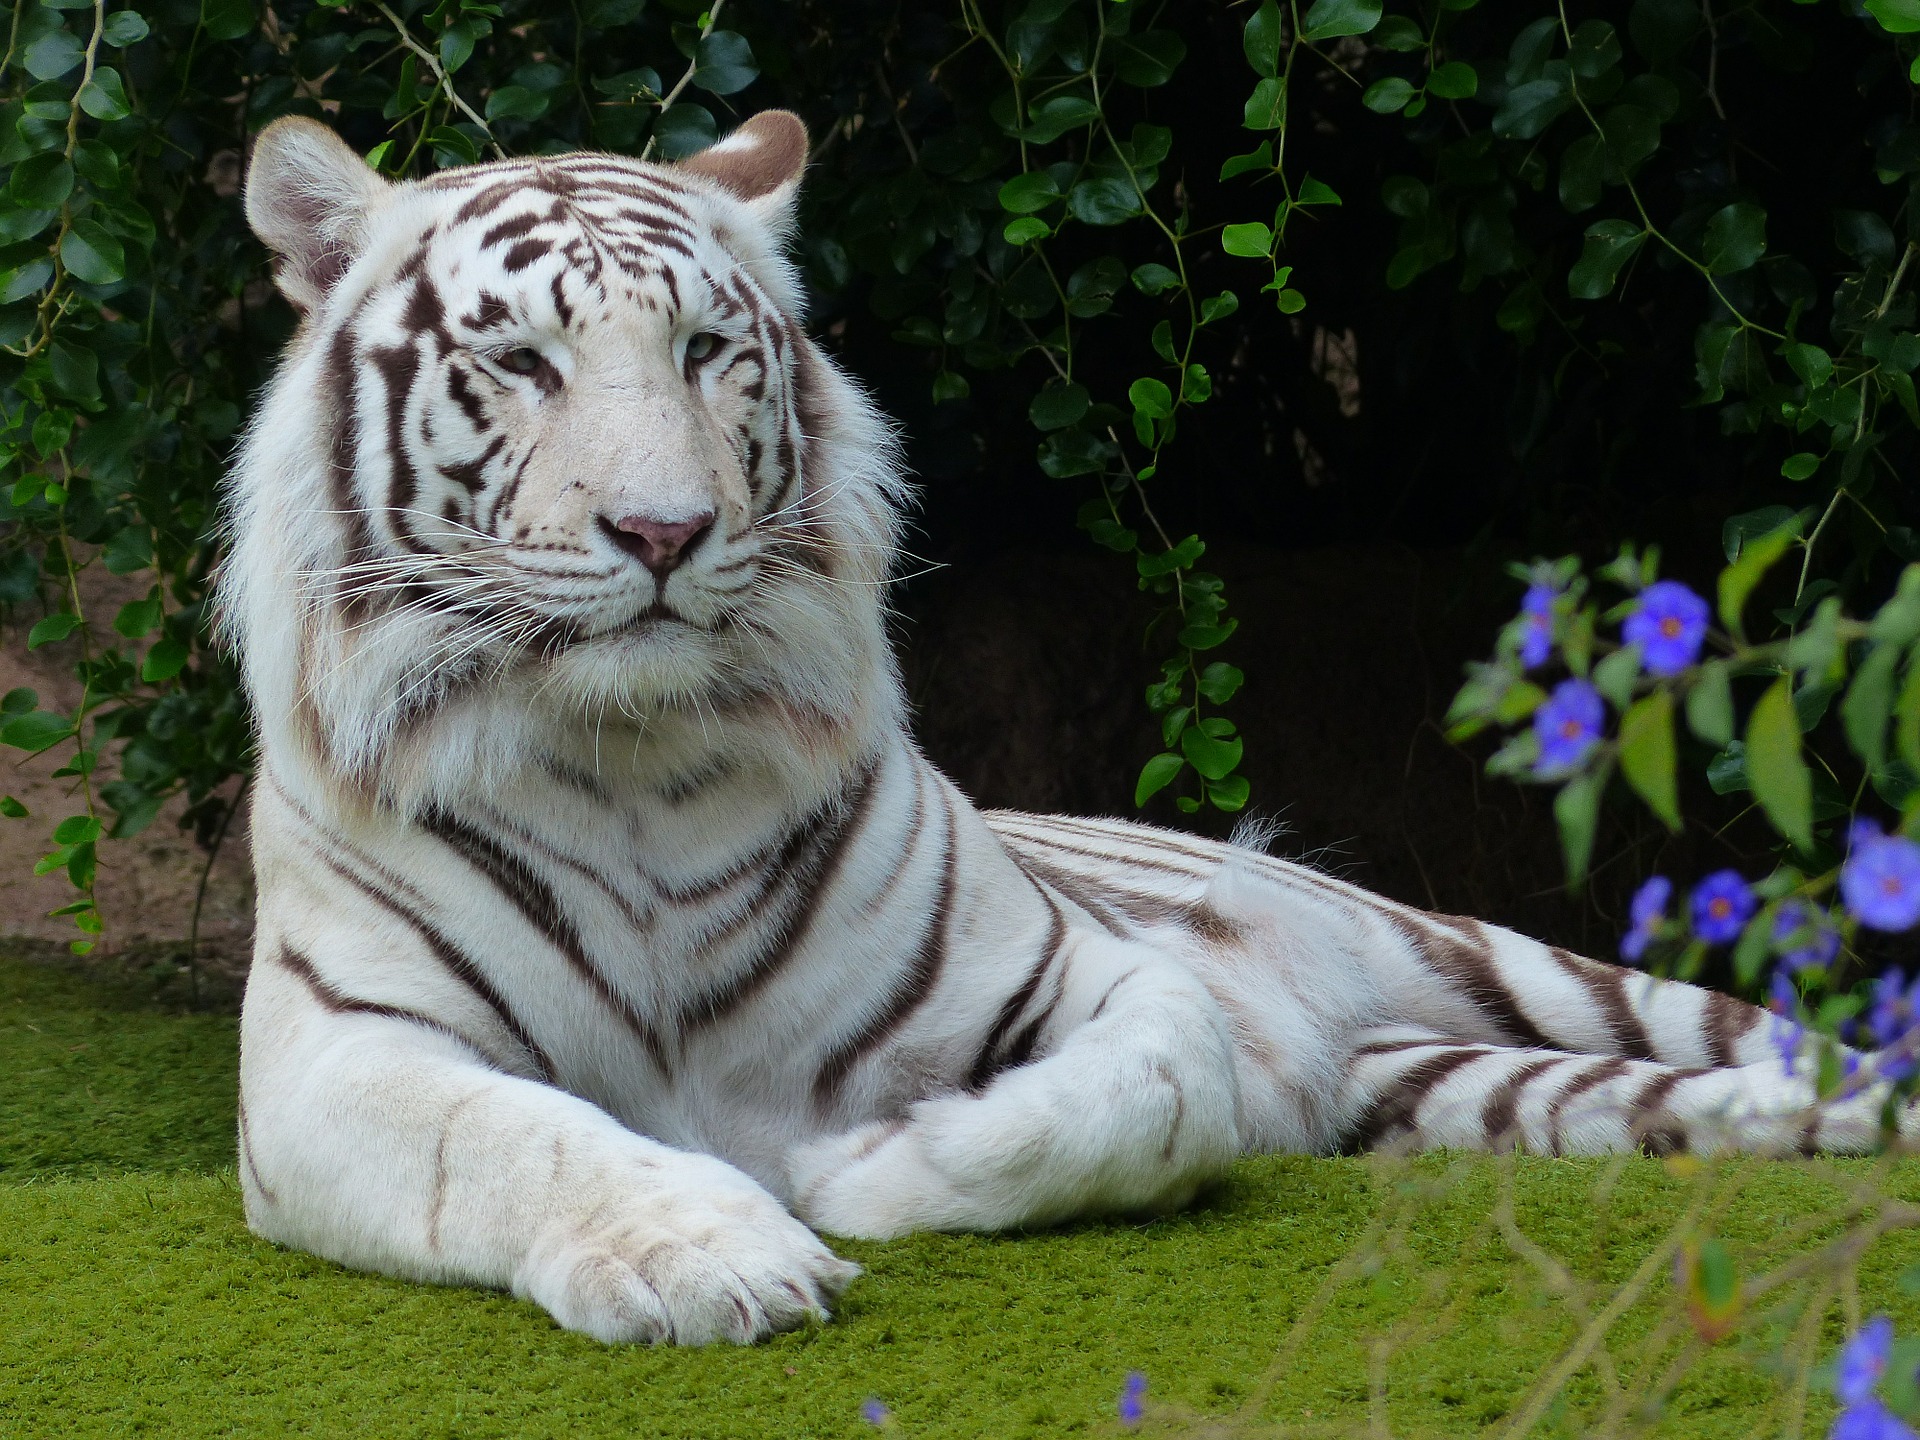 why are white tigers an endangered species and how many white tigers are left in the wild